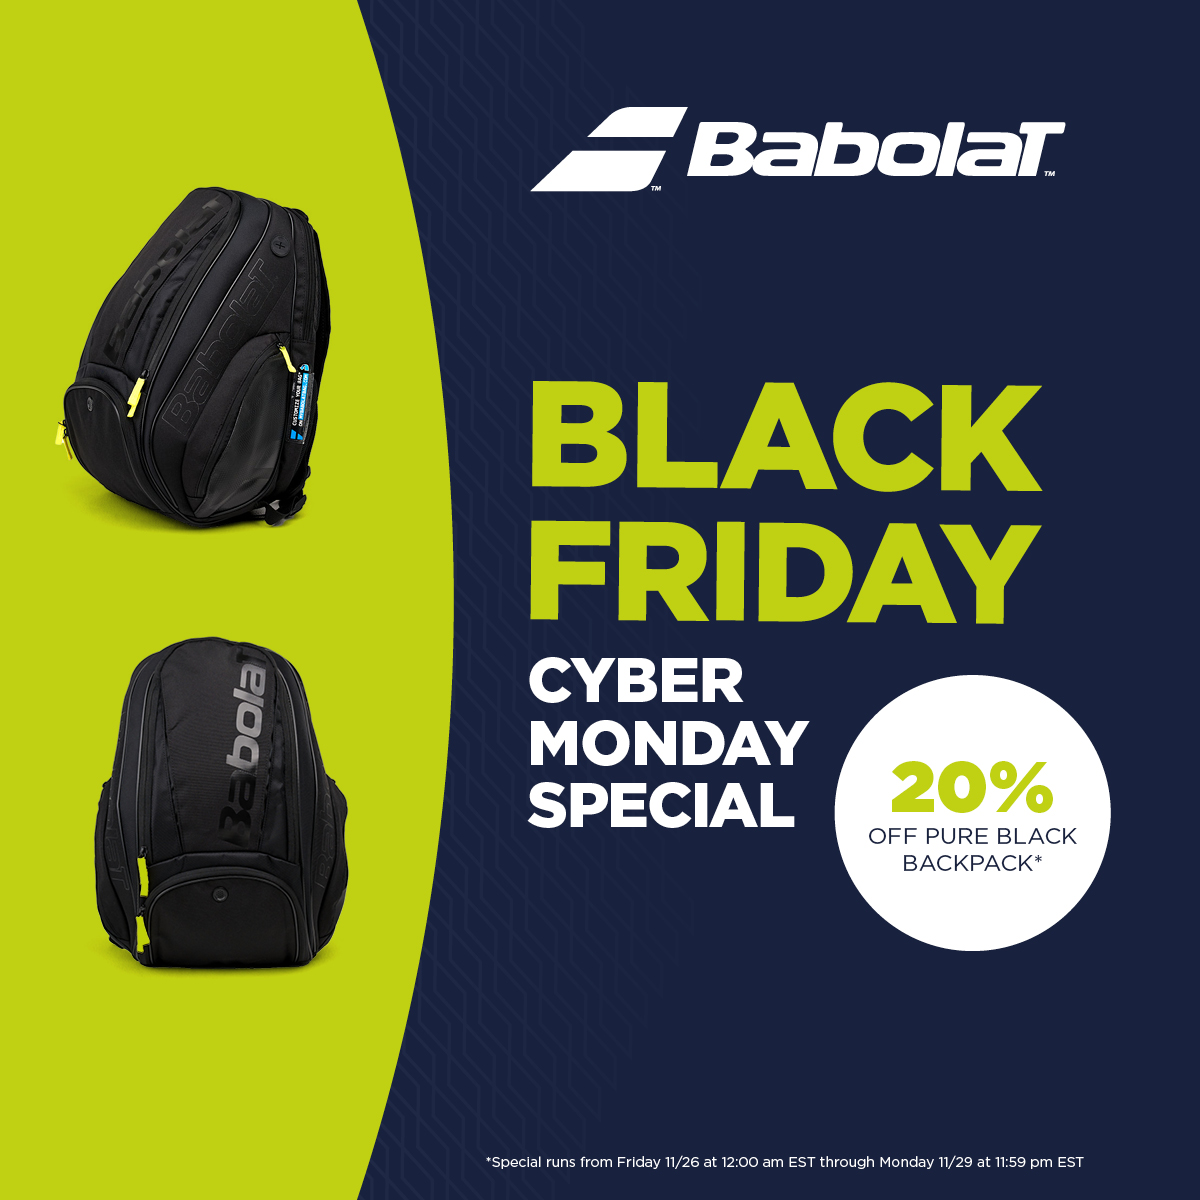 Babolat Black Friday / Cyber Monday Special Pricing on Backpack and String